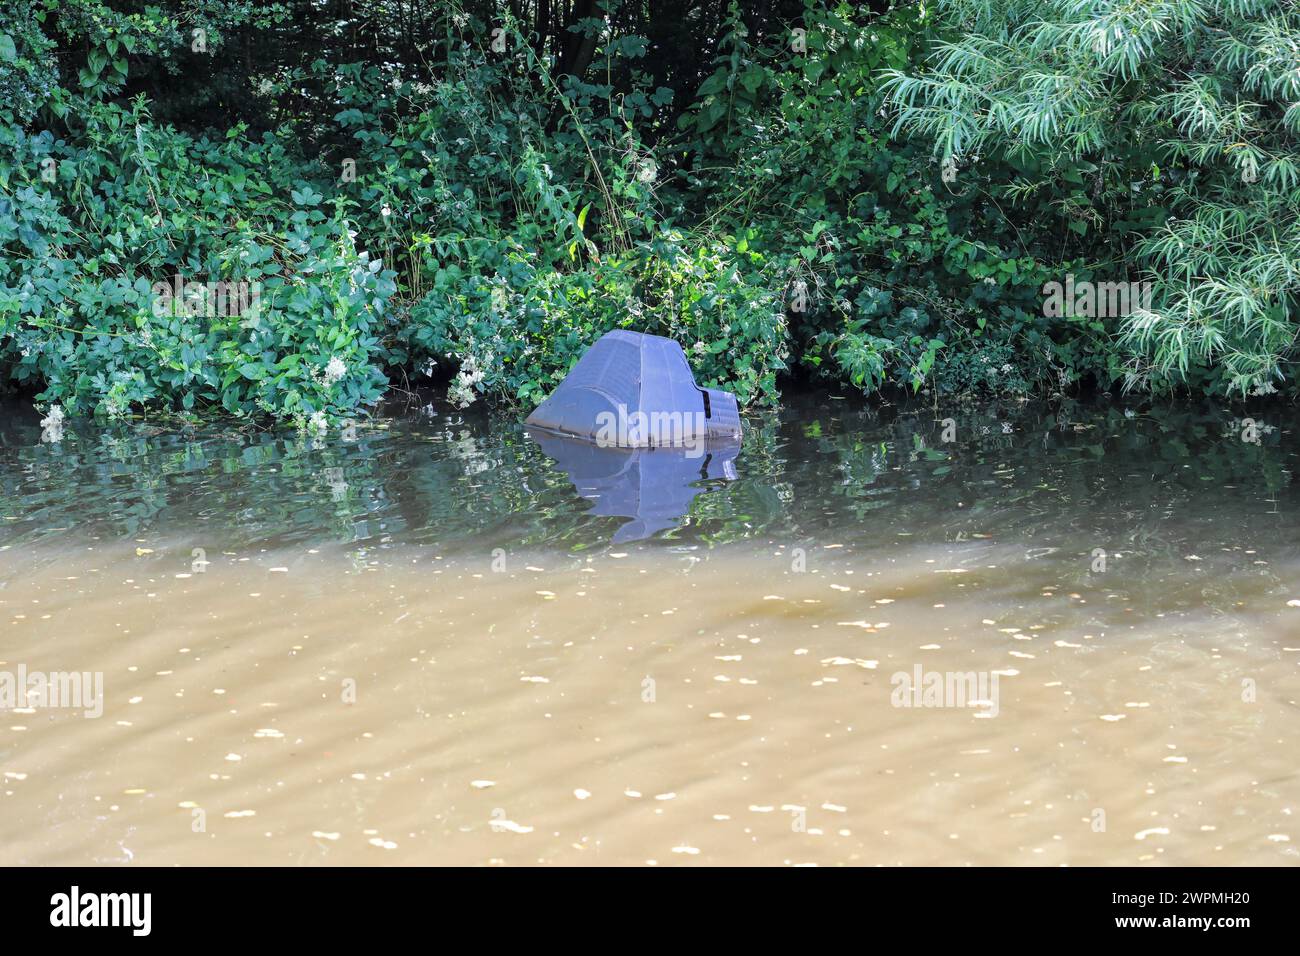 A dumped television set in the Trent and Mersey Canal, Stoke on Trent, Staffordshire, England, UK Stock Photo